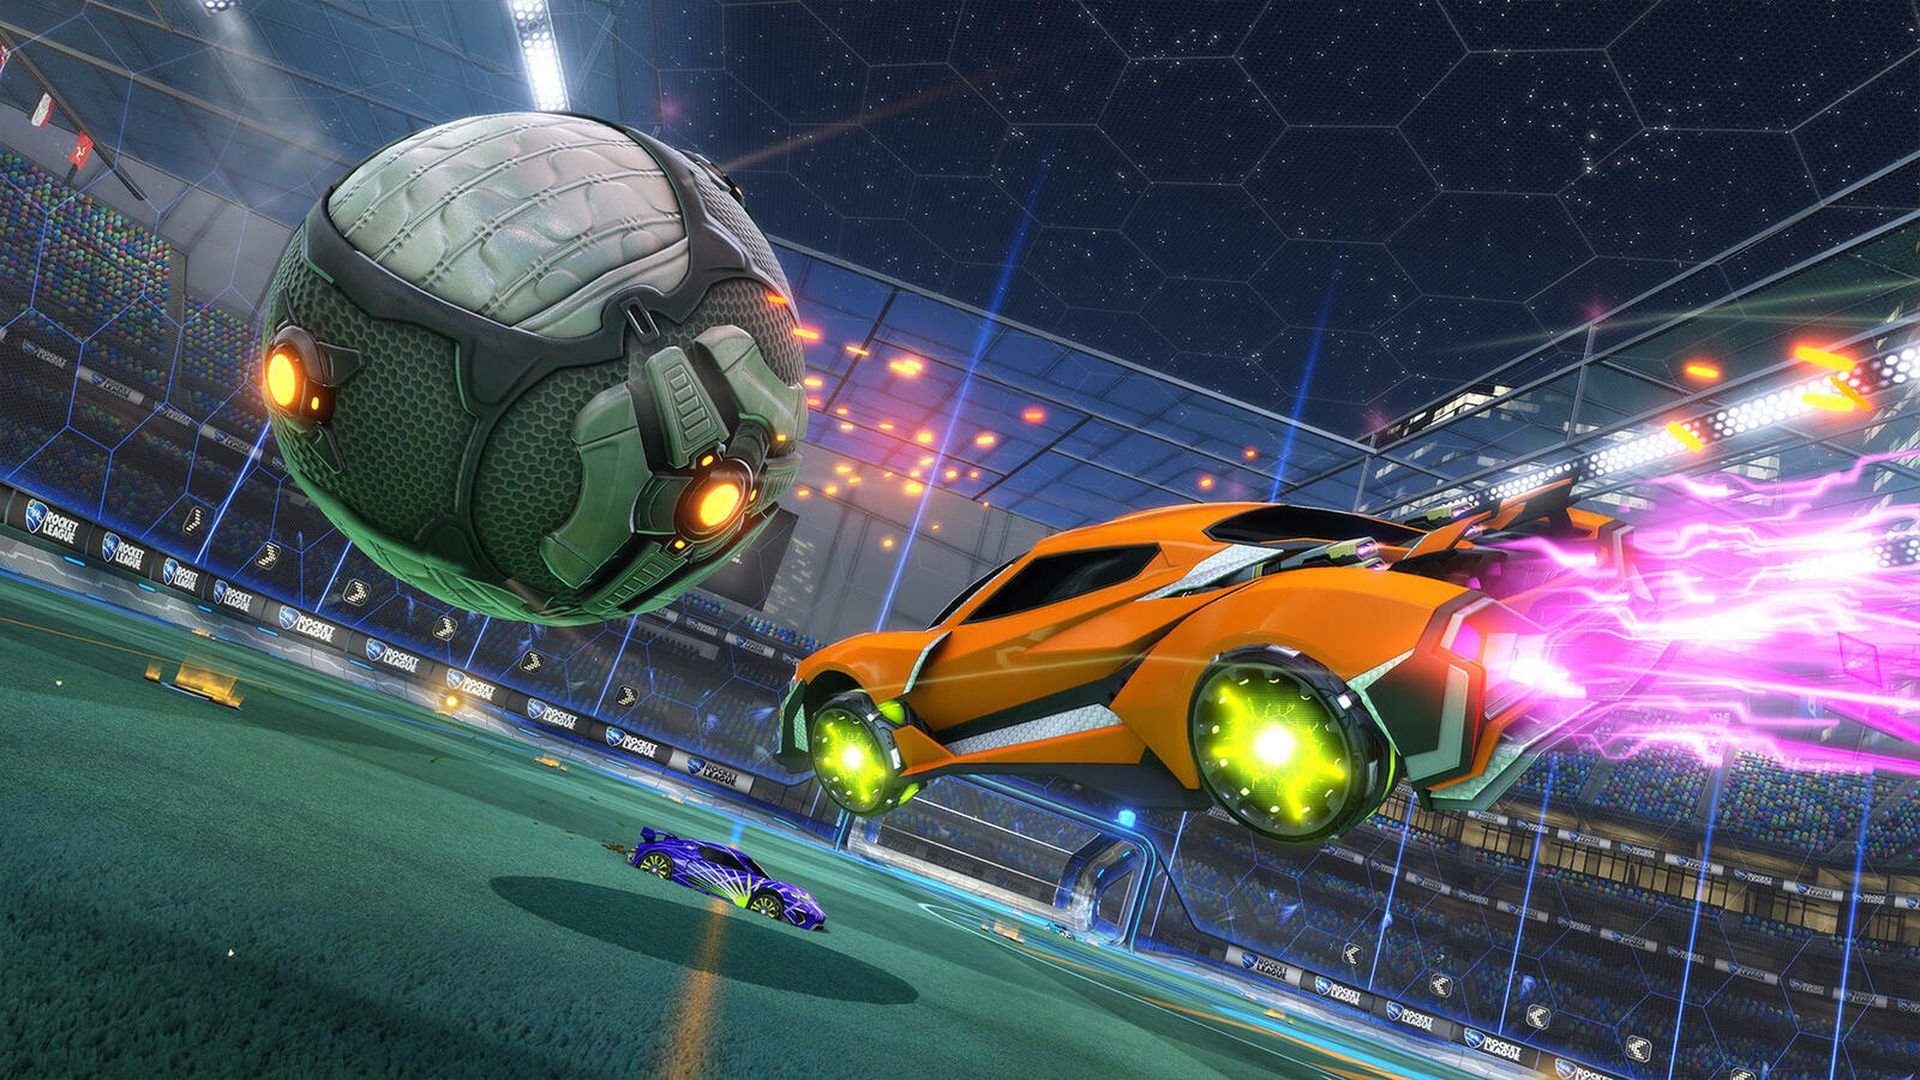 In this article, we are going to be covering the Rocket League codes for July 2022, so you can claim and enjoy the freebies that the game has to offer.